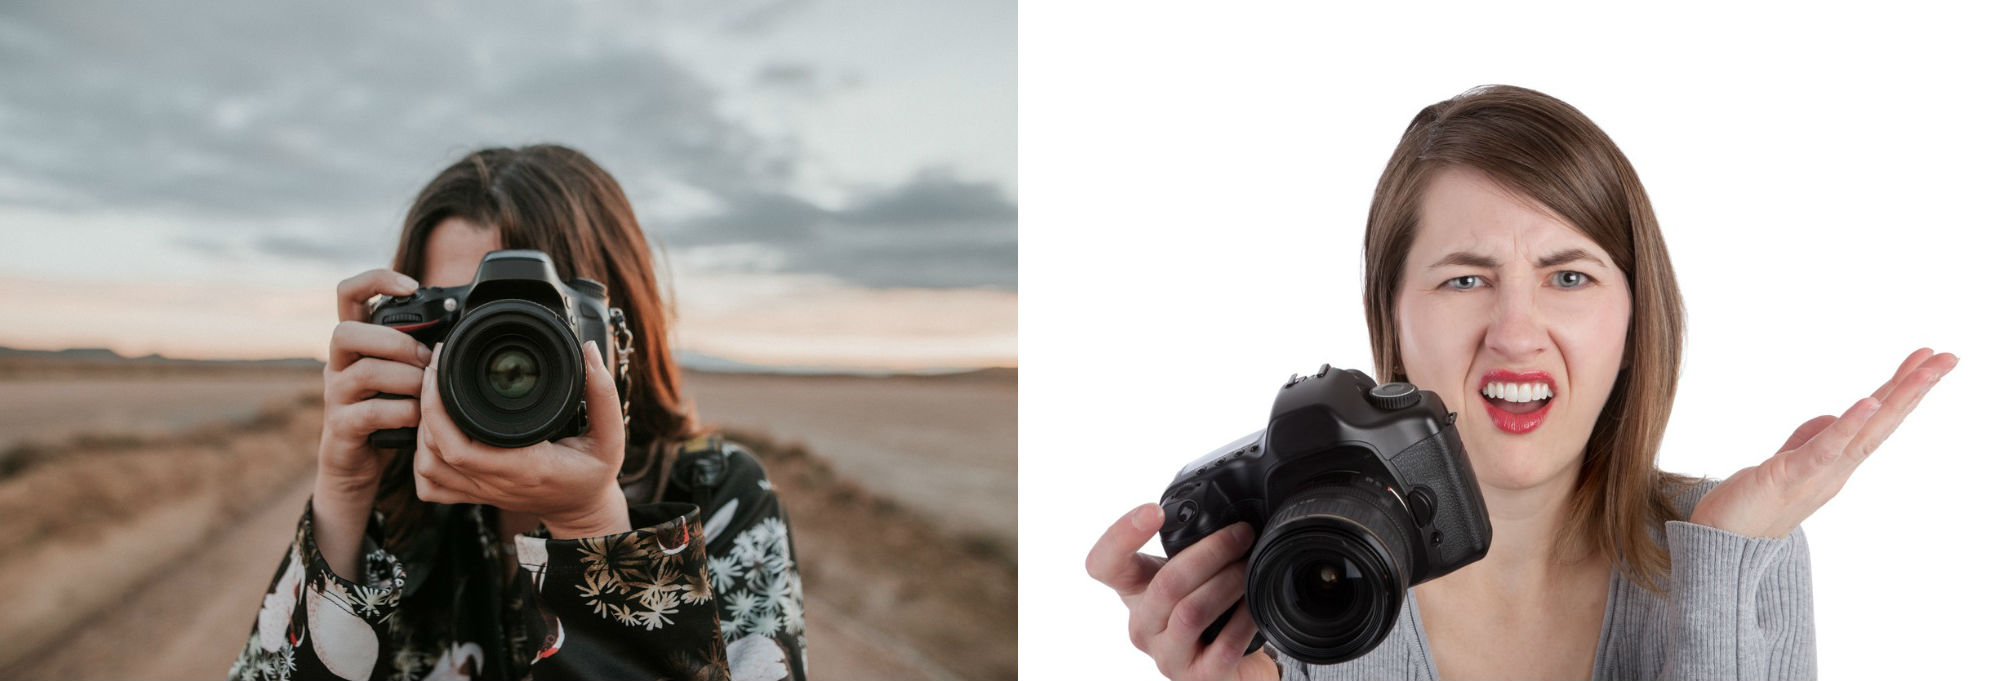 buying a new dslr expectation vs reality image 